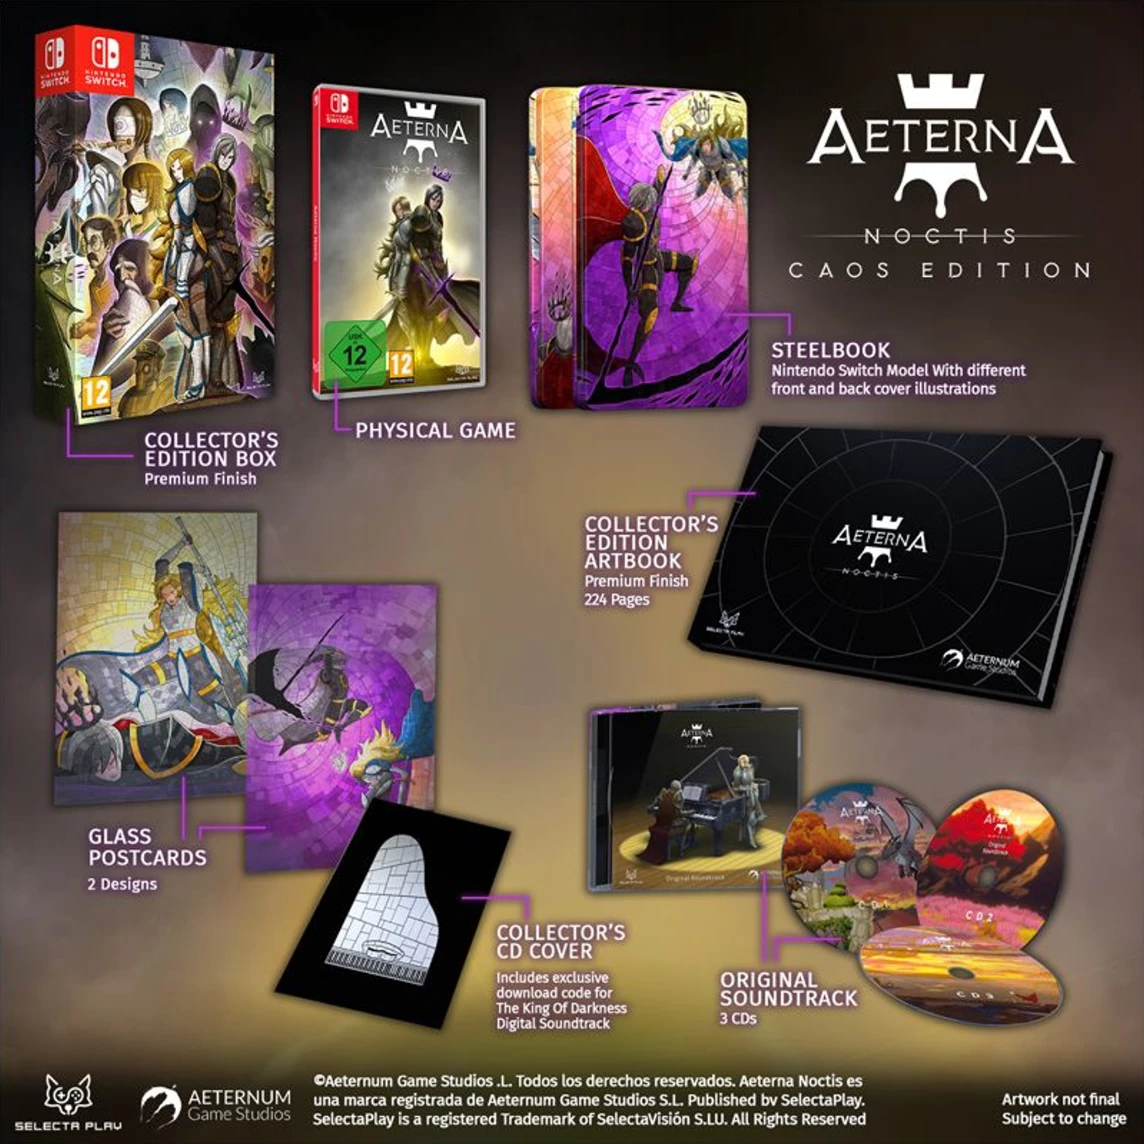 Aeterna Noctis - Caos Edition (Switch), Selecta Play 